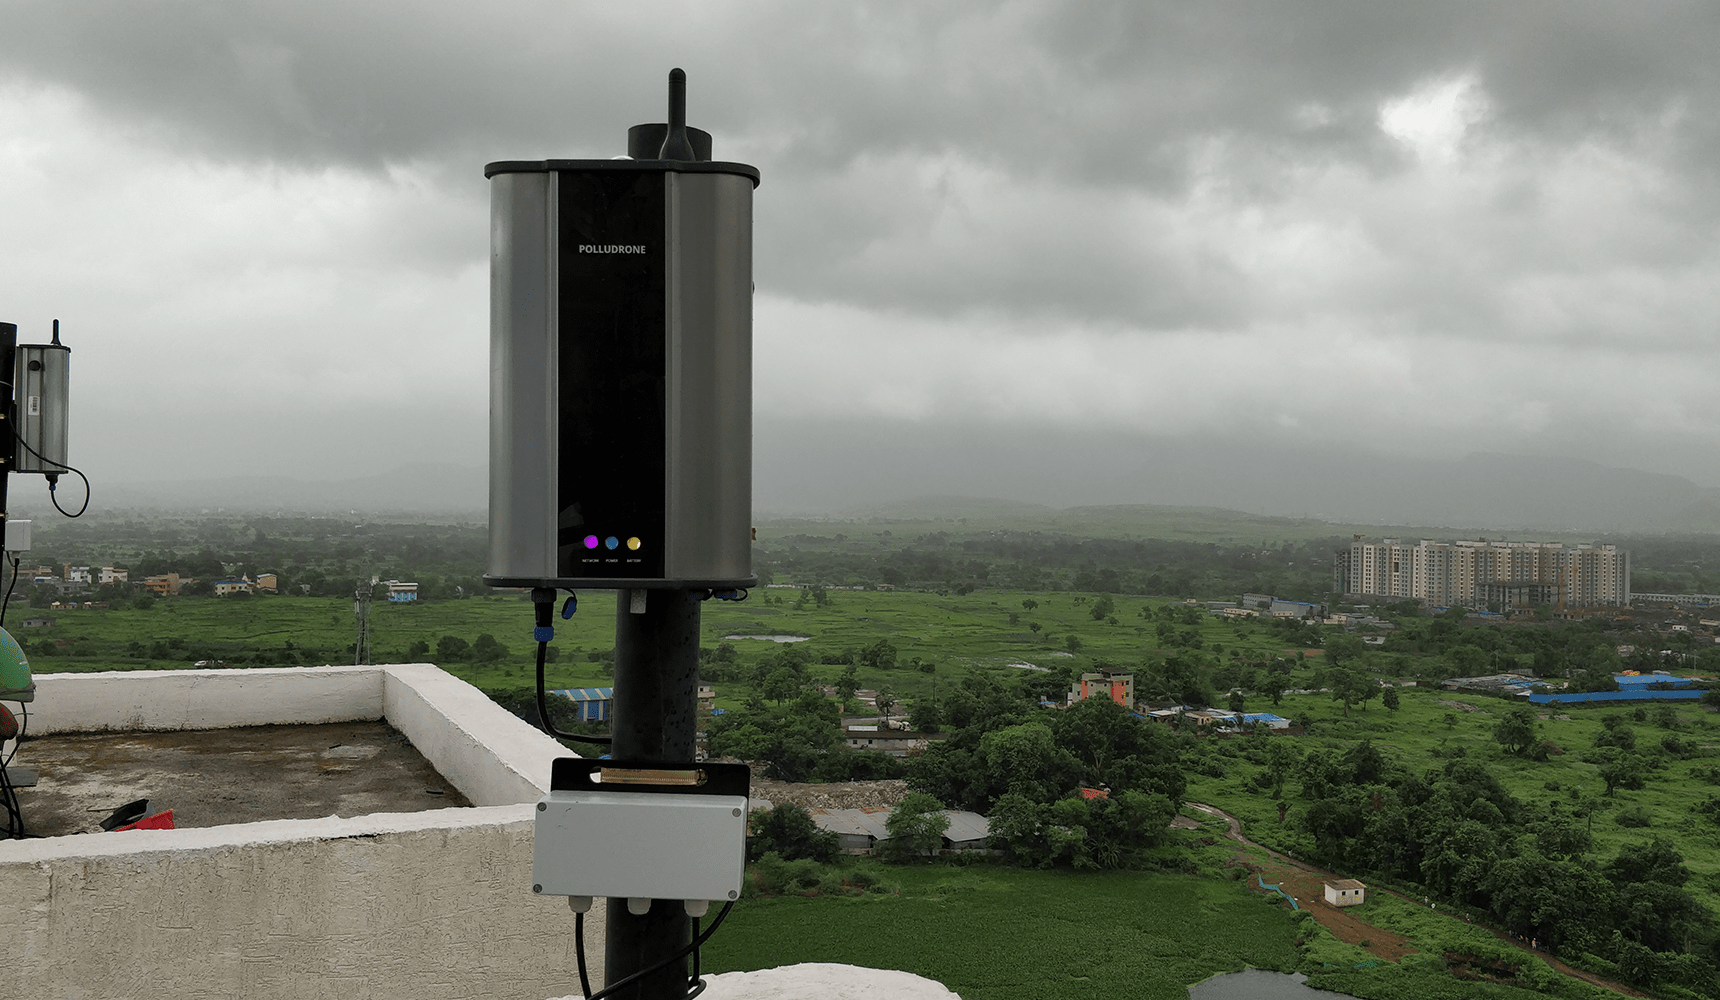 Oizom Air Monitoring System - Polludrone measures outdoor air quality along with its inbuilt Automatic Weather Station.